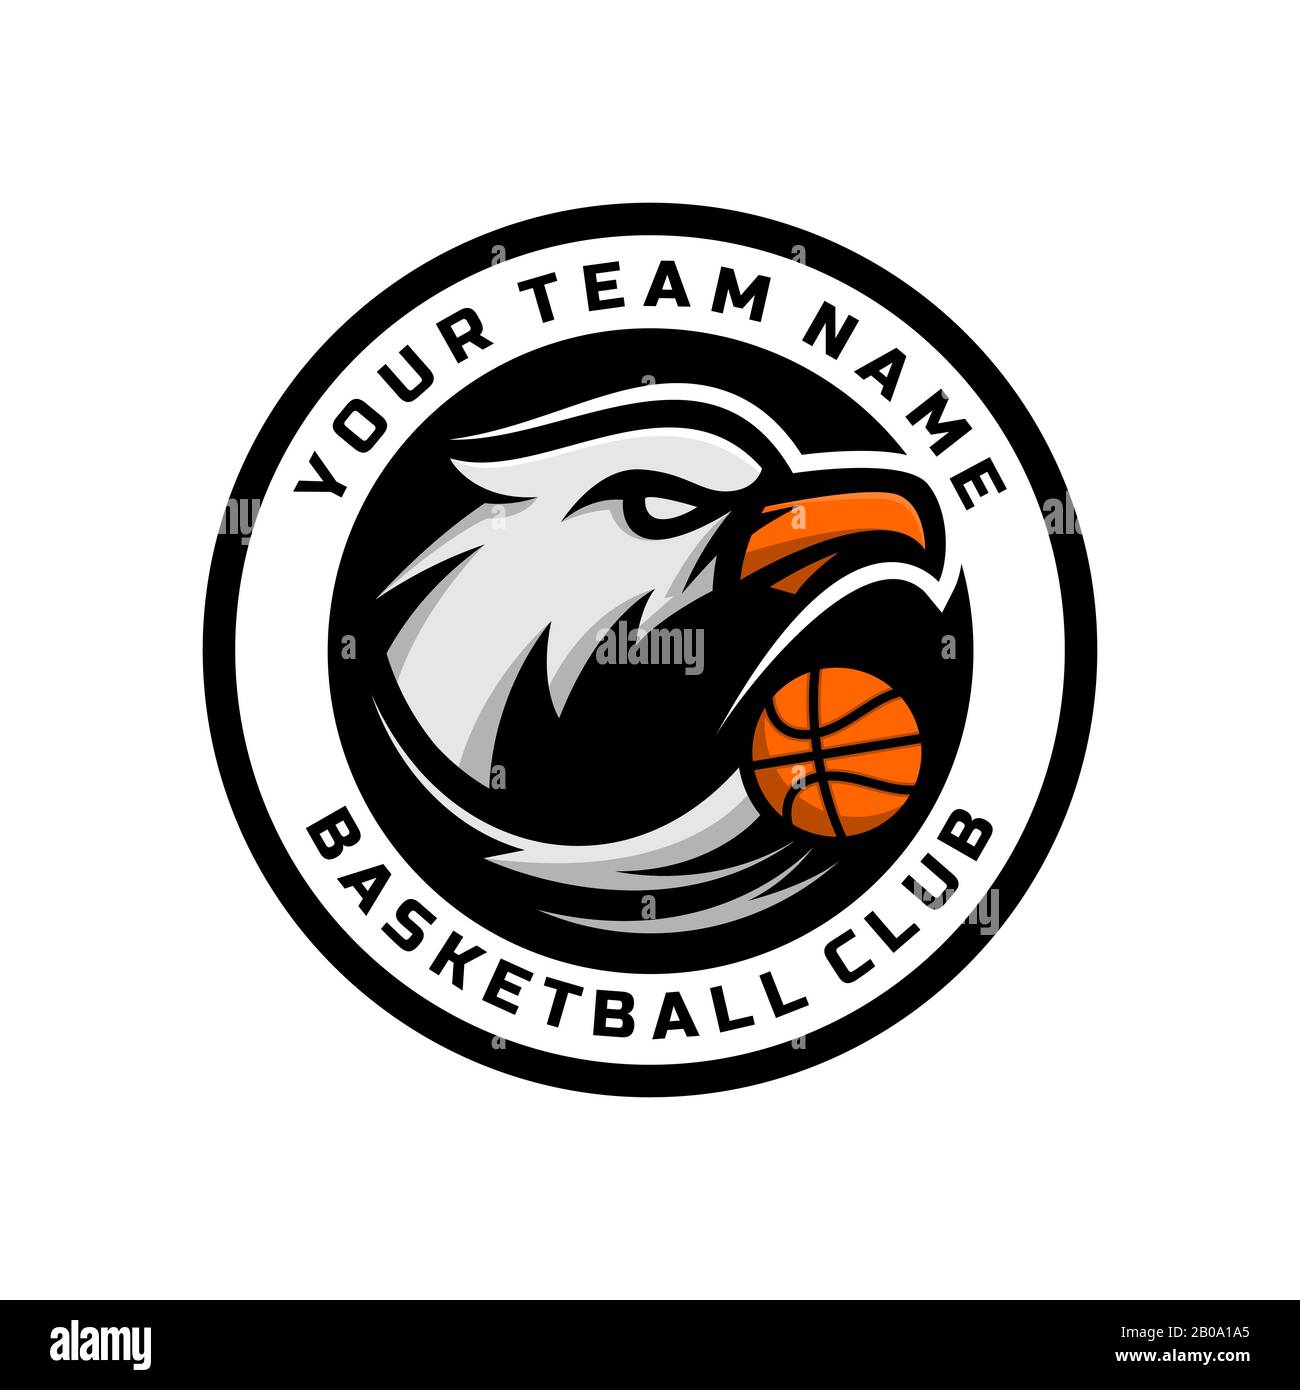 Eagle head logo for the basketball team logo. vector illustration. with a combination of circle badges. Stock Vector